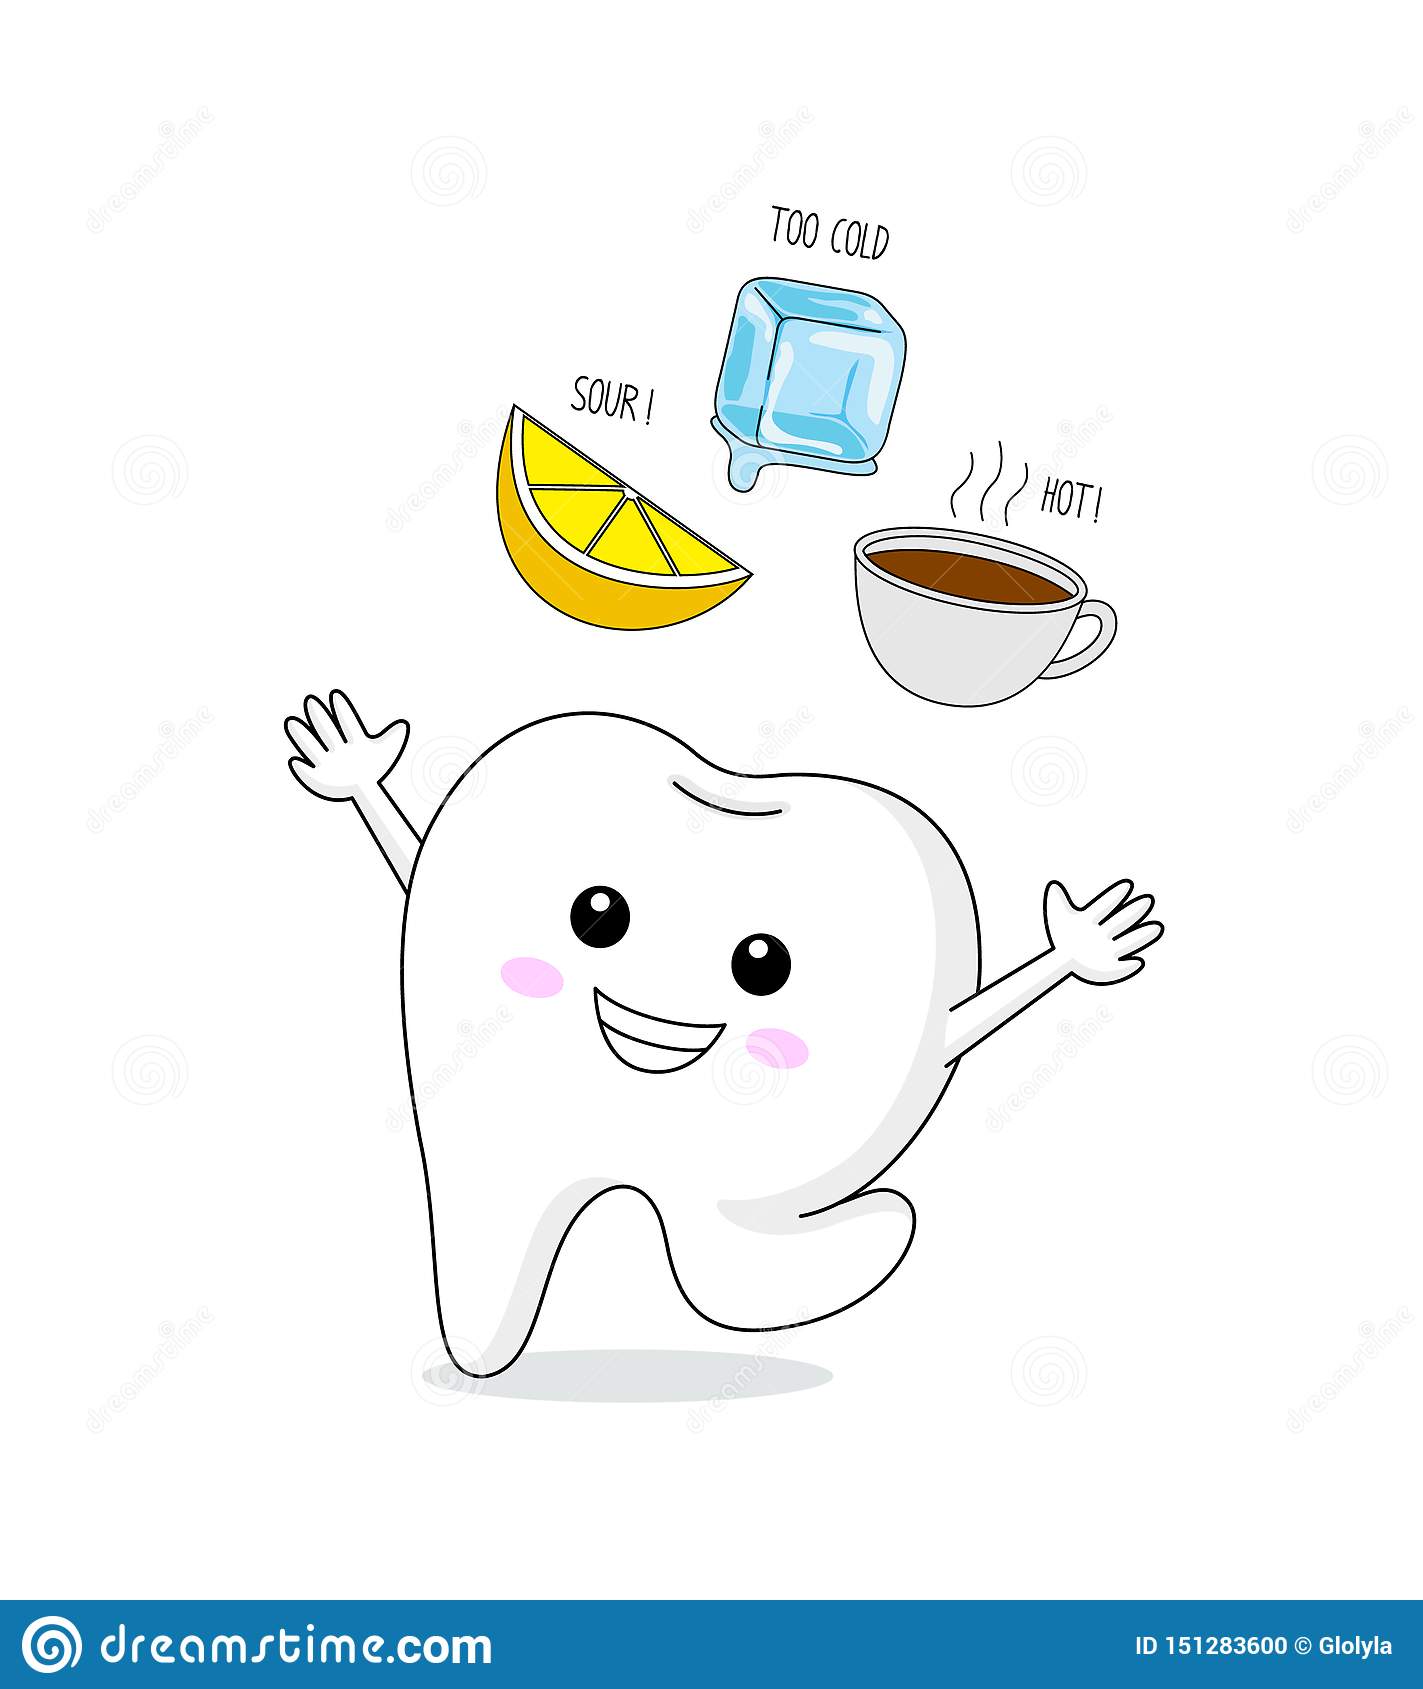 Healthy Tooth To Cold, Sour and Hot. Stock Vector